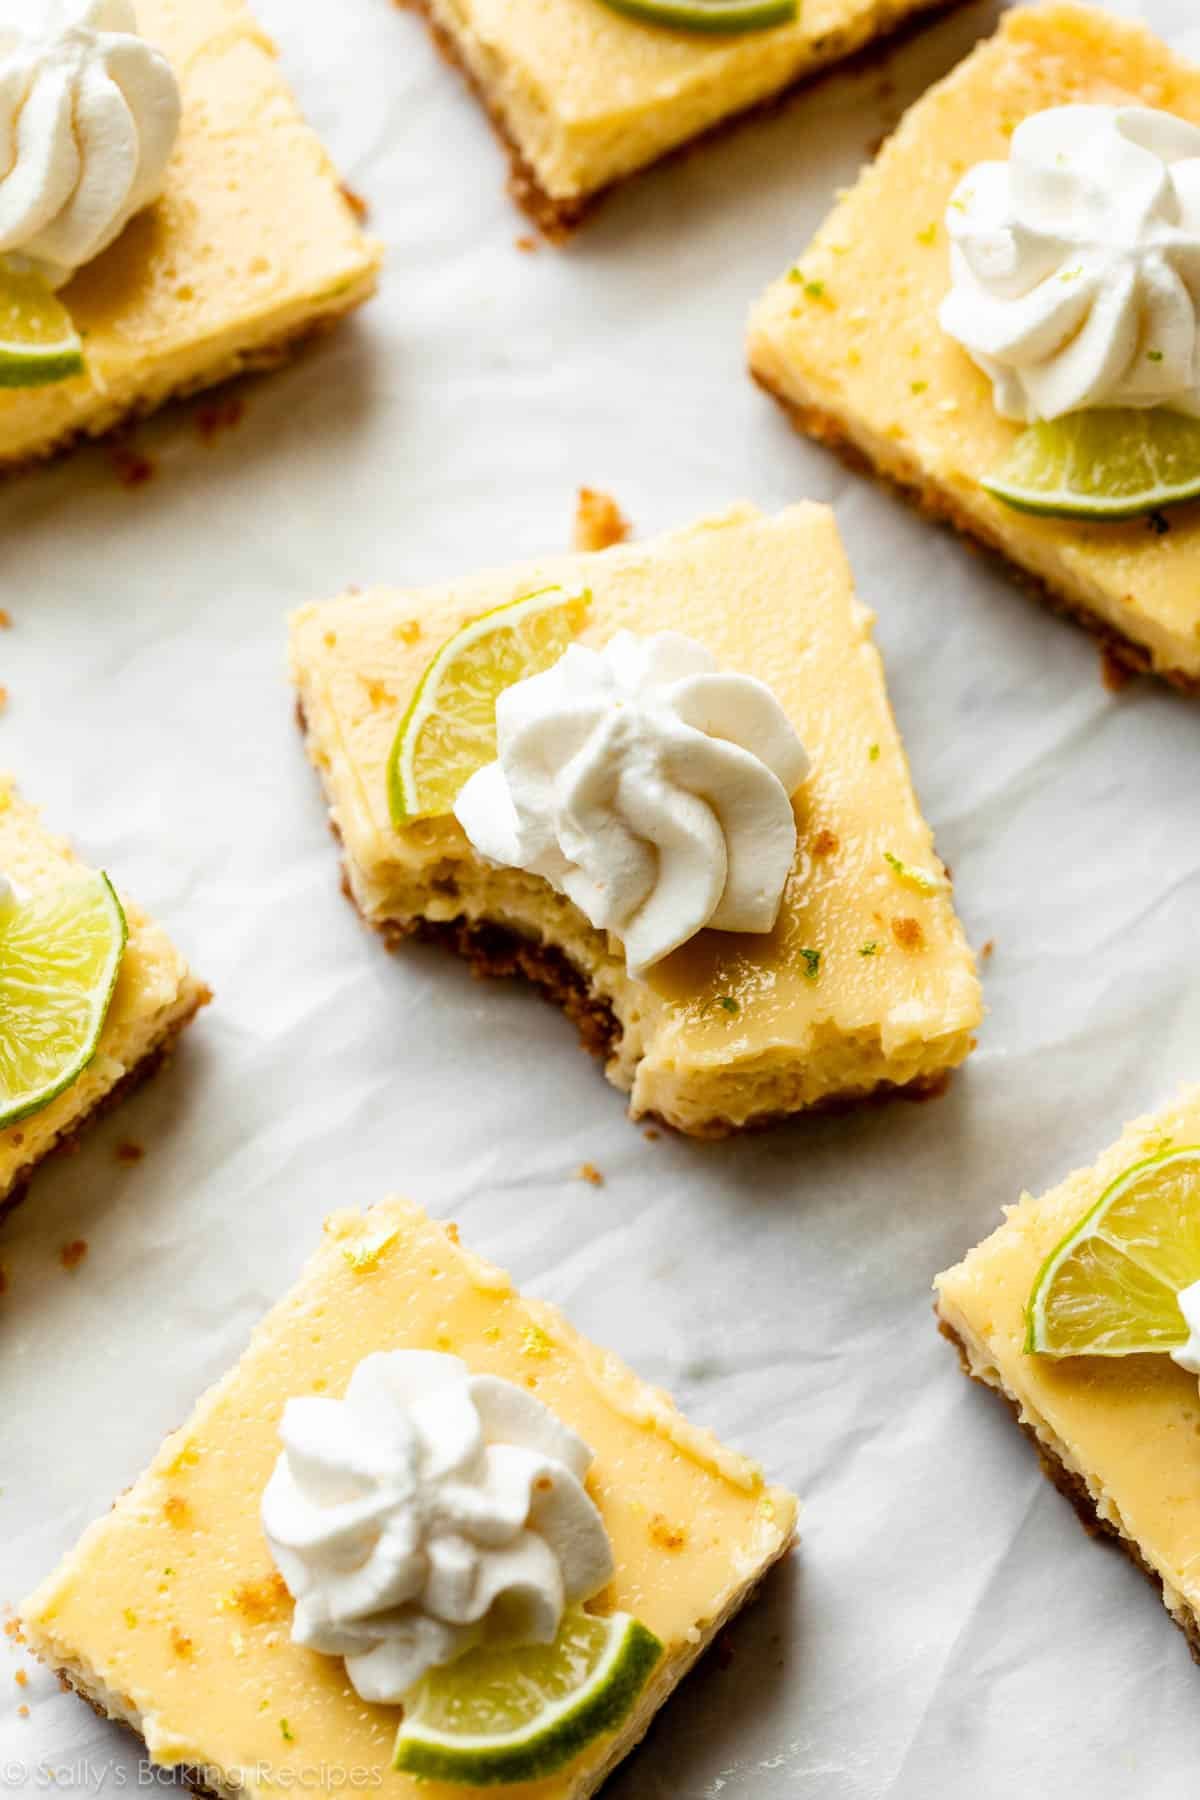 key lime pie bars with piped whipped cream and lime slices on top.